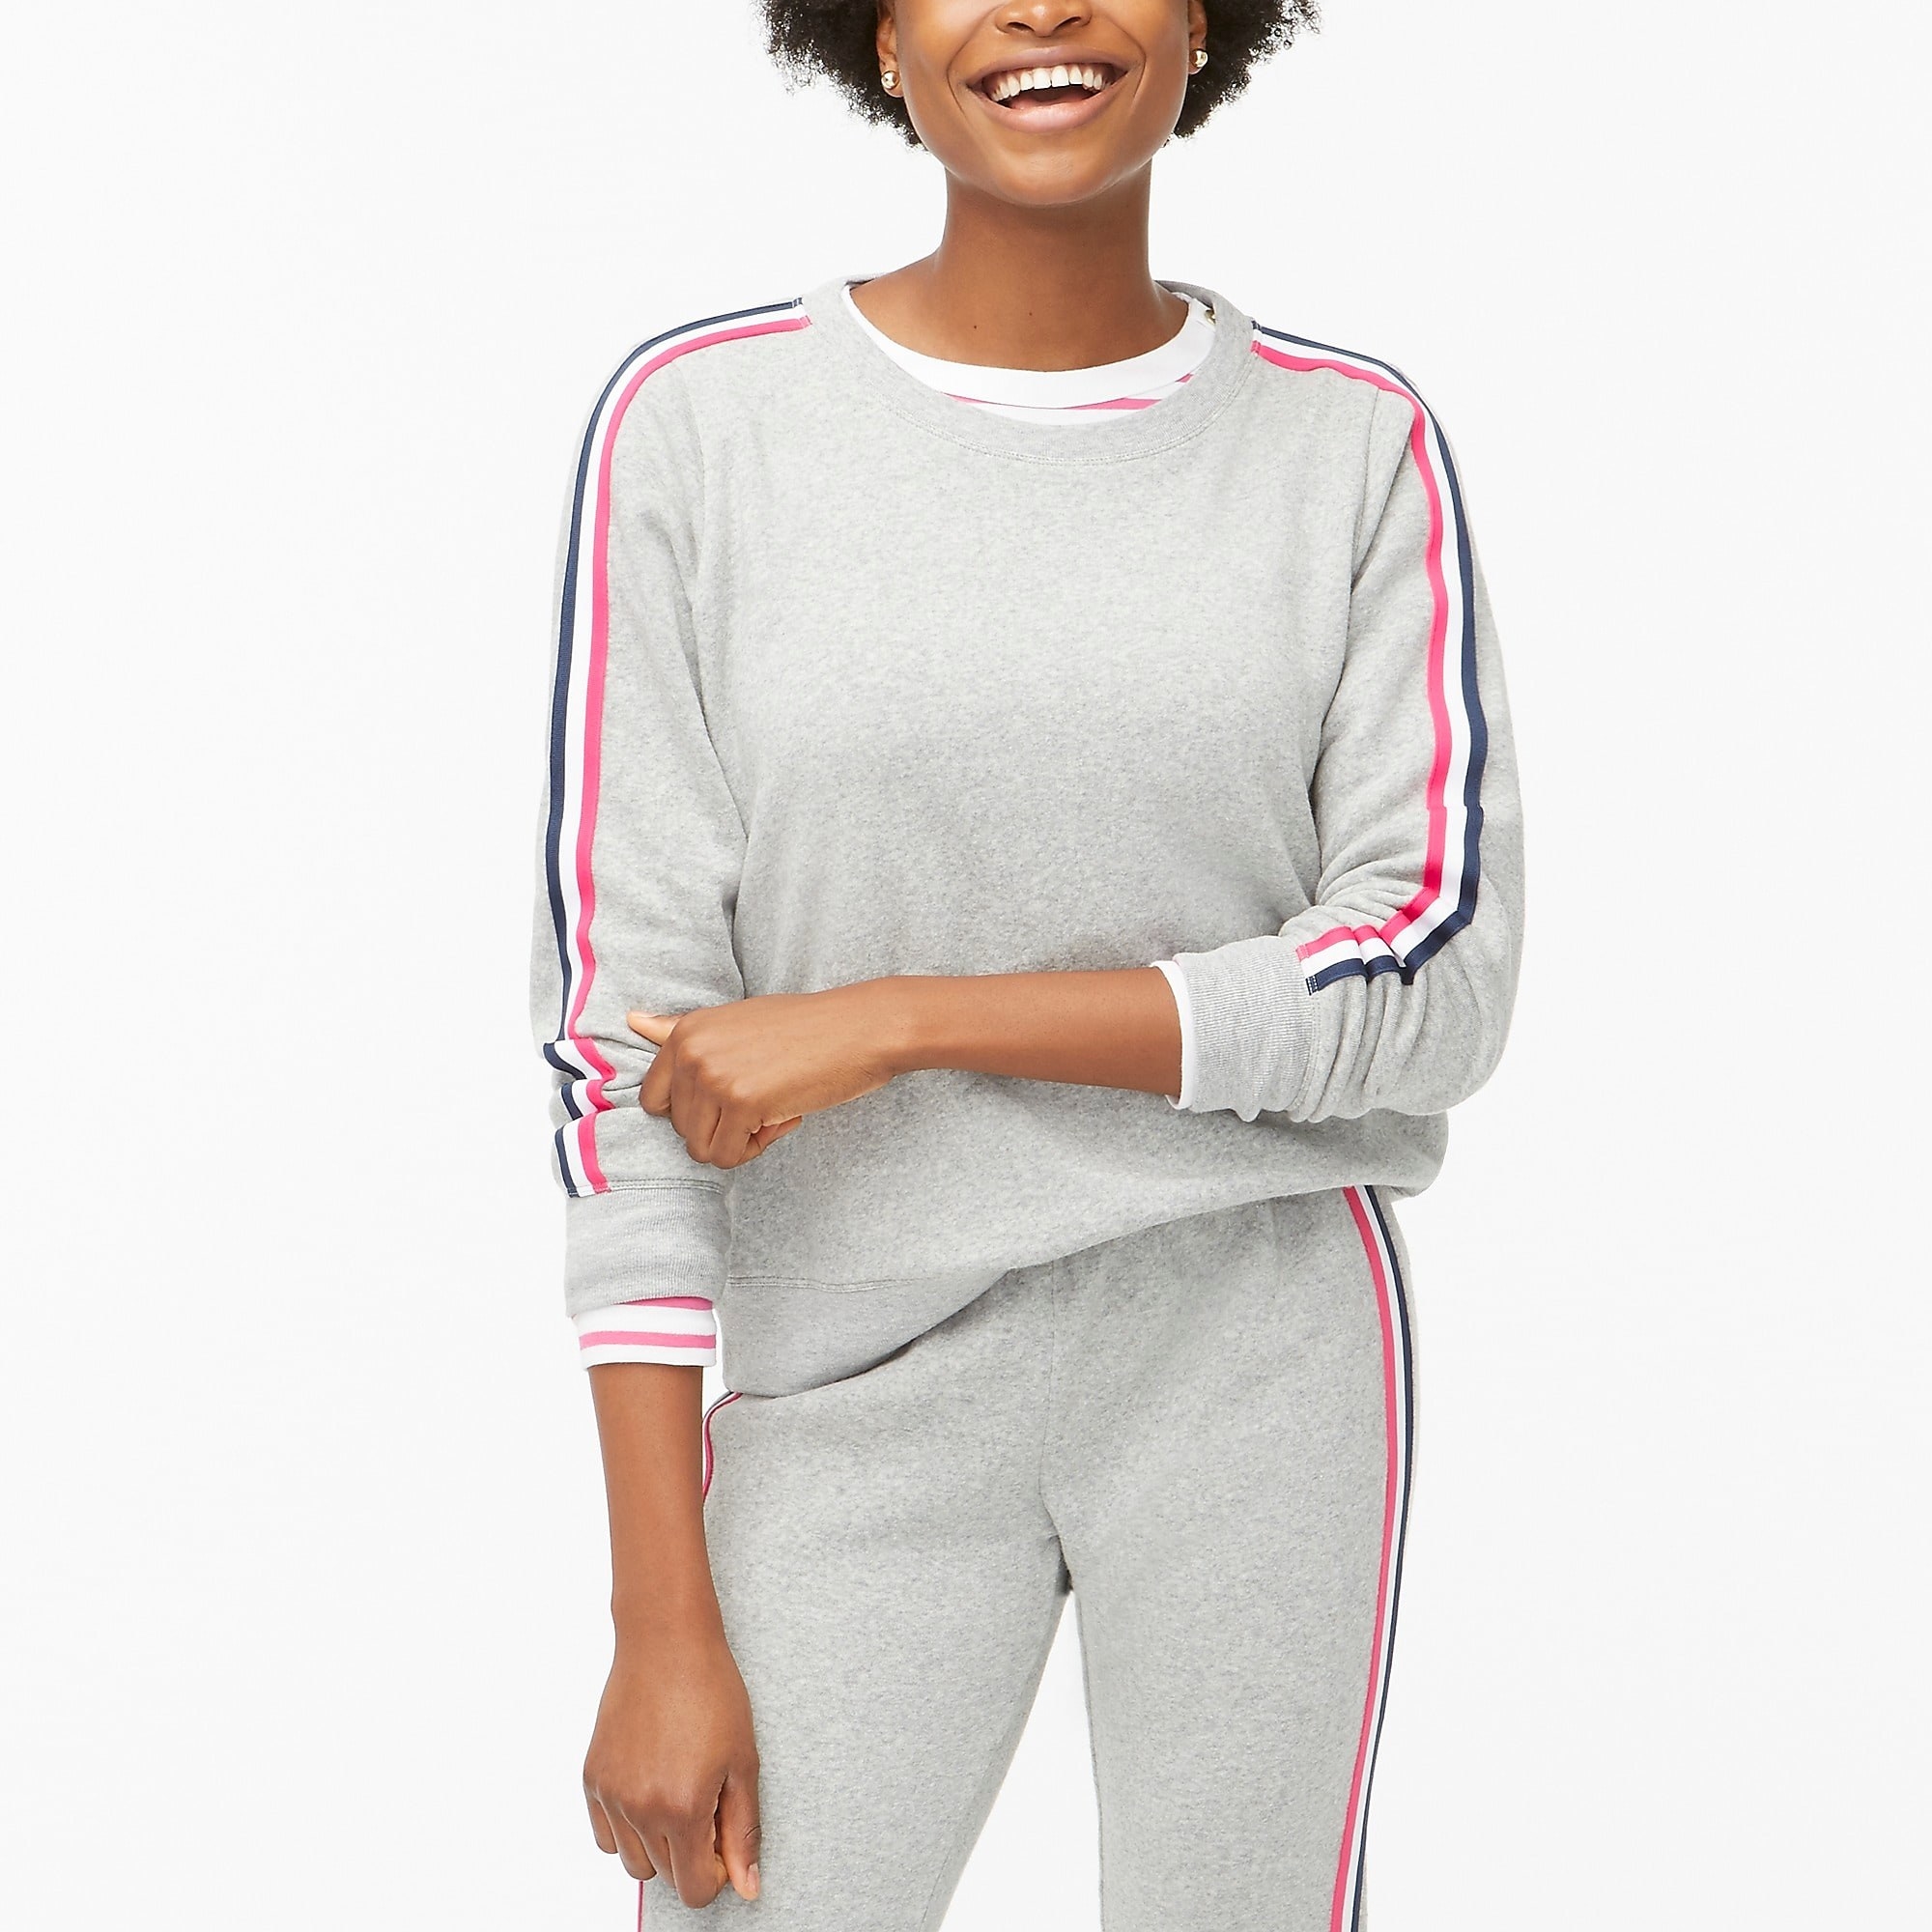 Model wearing the gray sweatshirt with pink, navy, and white stripes along sleeves